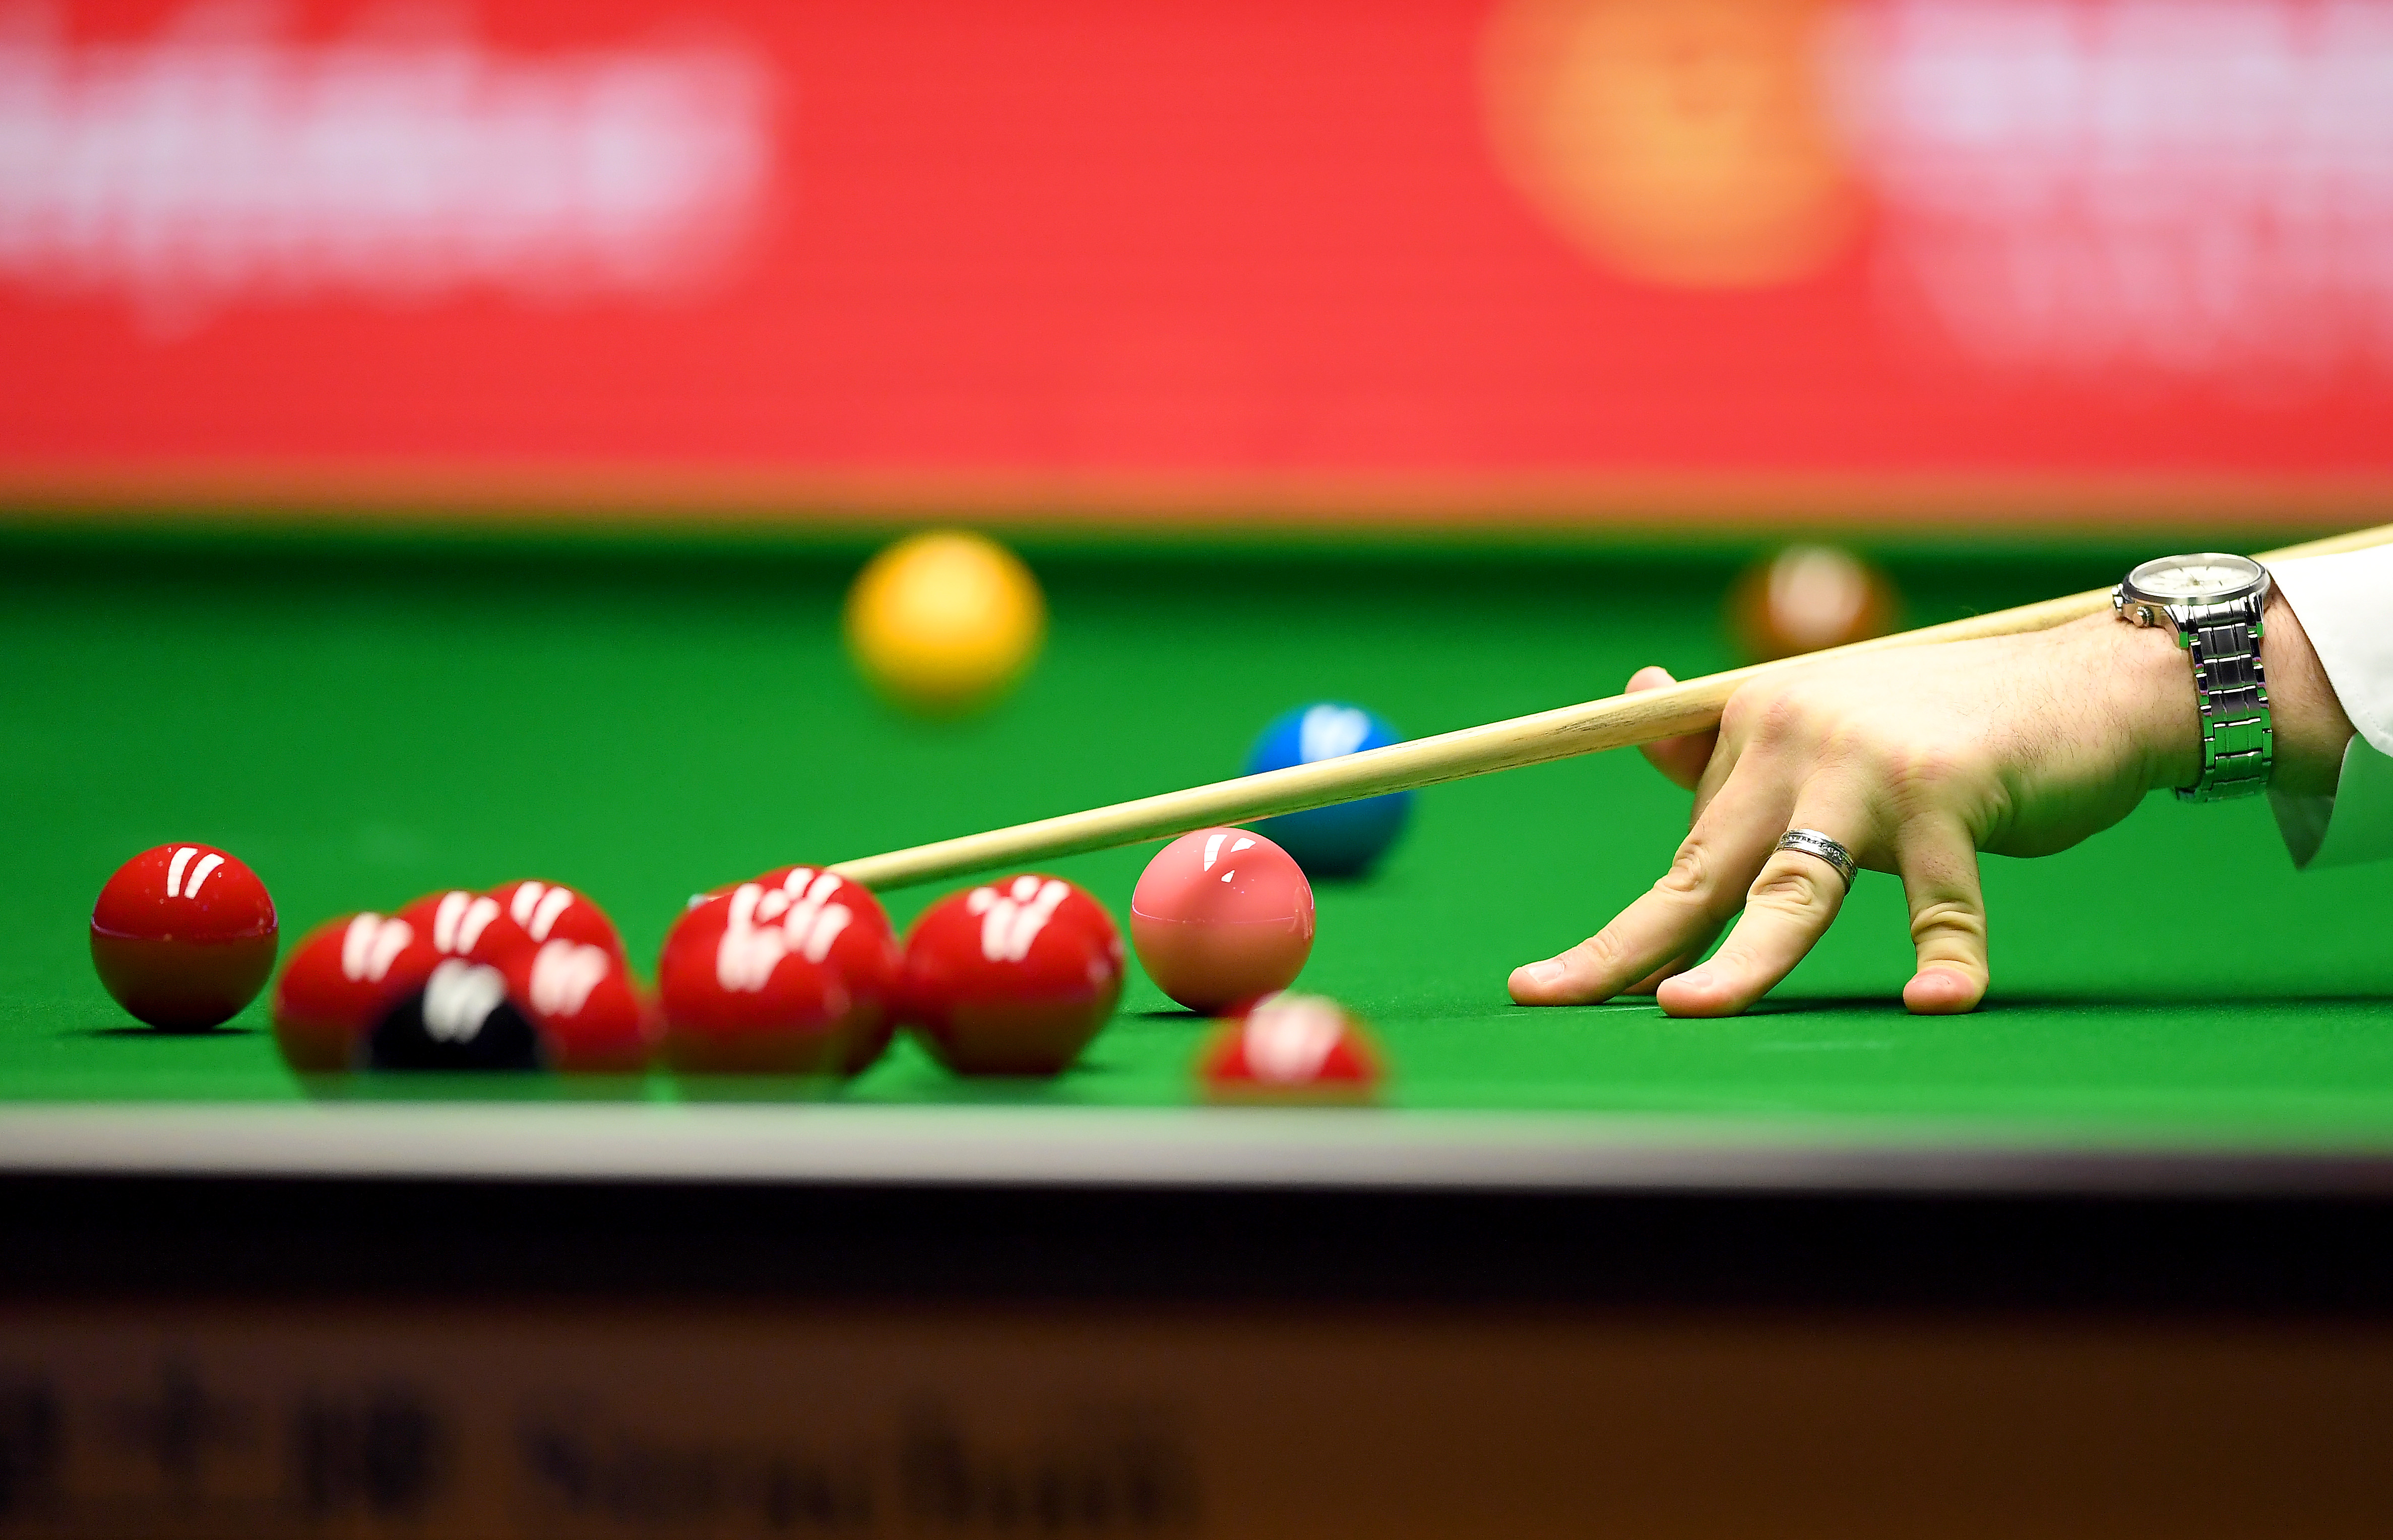 UK Snooker Championship LIVE Watch Ronnie O Sullivan, Shaun Murphy and Mark Allen in action - Live